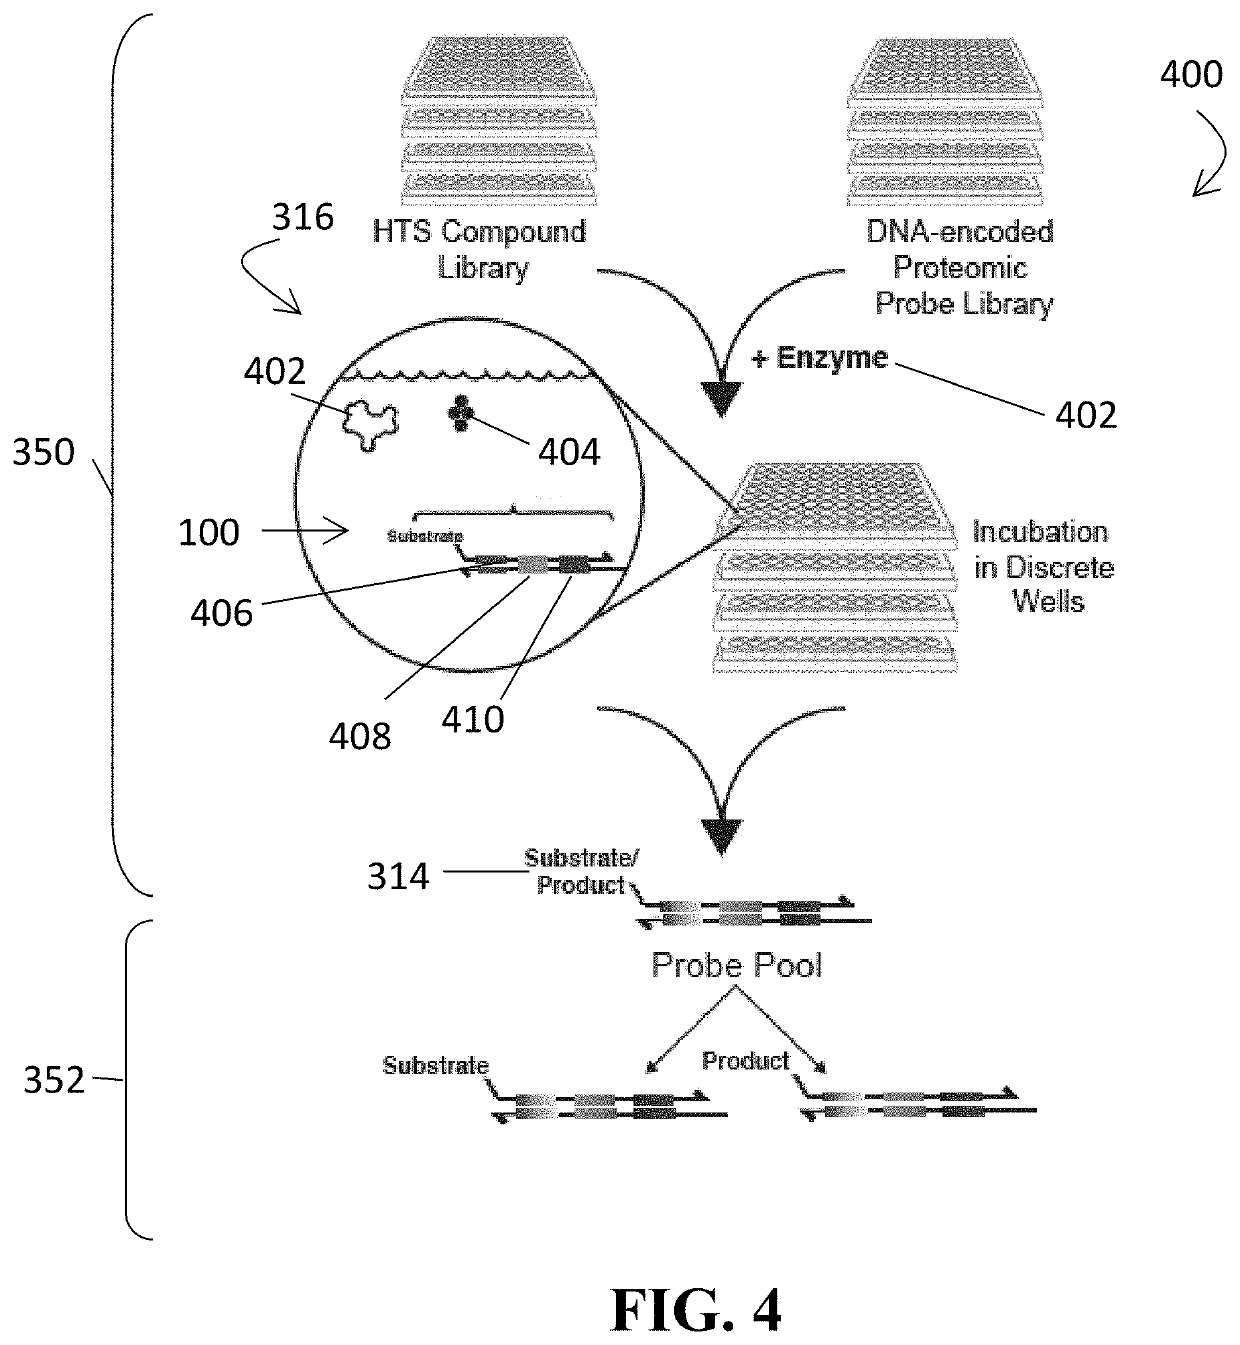 Systems and methods for proteomic activity analysis using dna-encoded probes